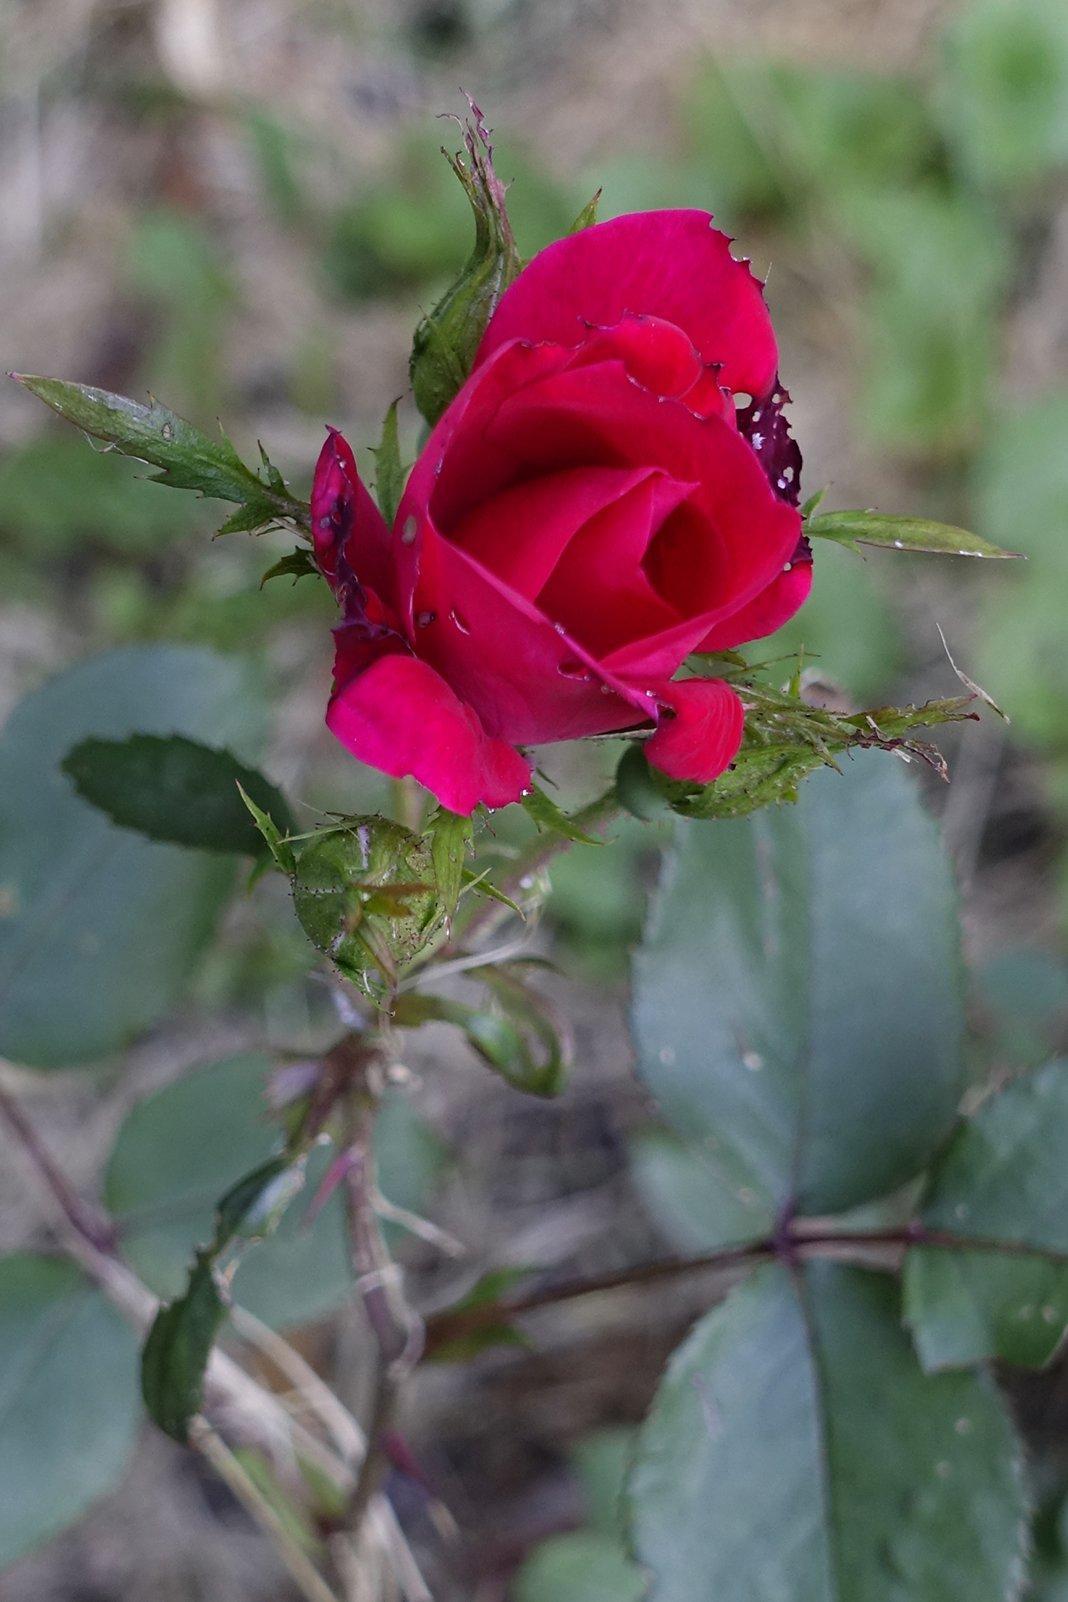 Robin Botie of Ithaca, New York, photographs a bruised rose to illustrate resilience.